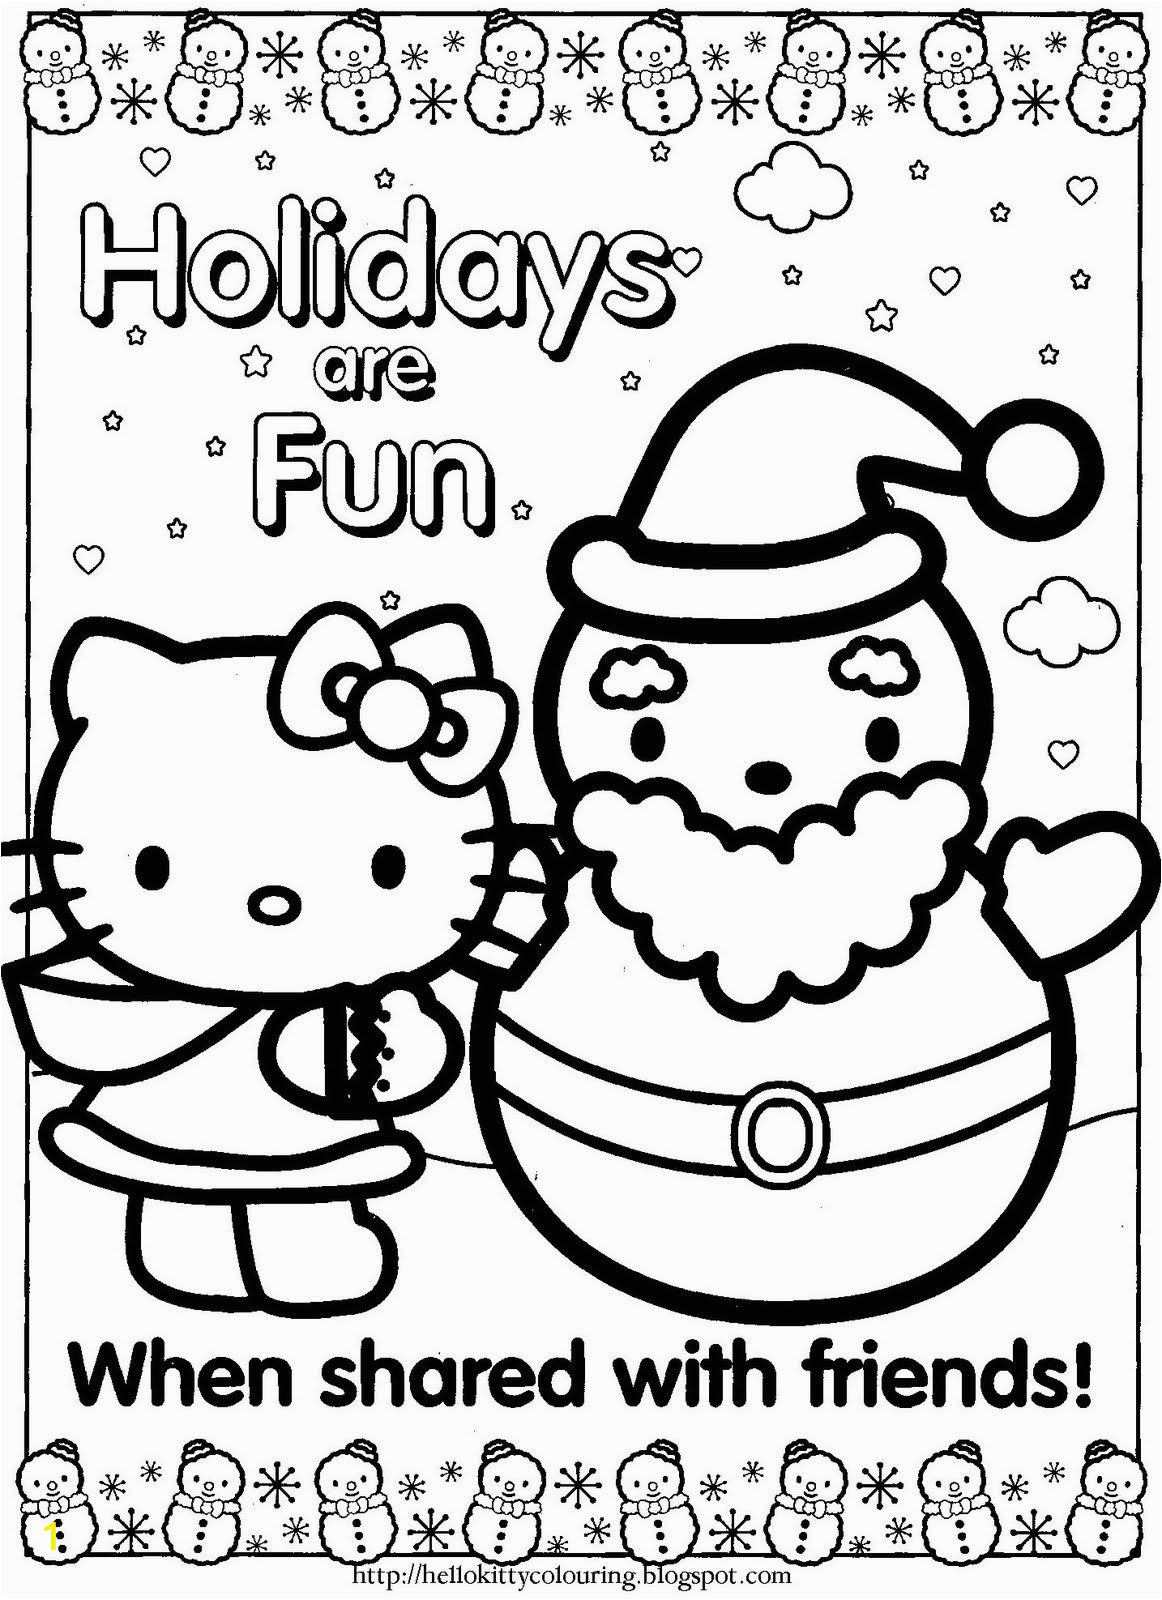 Hello Kitty Coloring Pages with Balloons Happy Holidays Hello Kitty Coloring Page